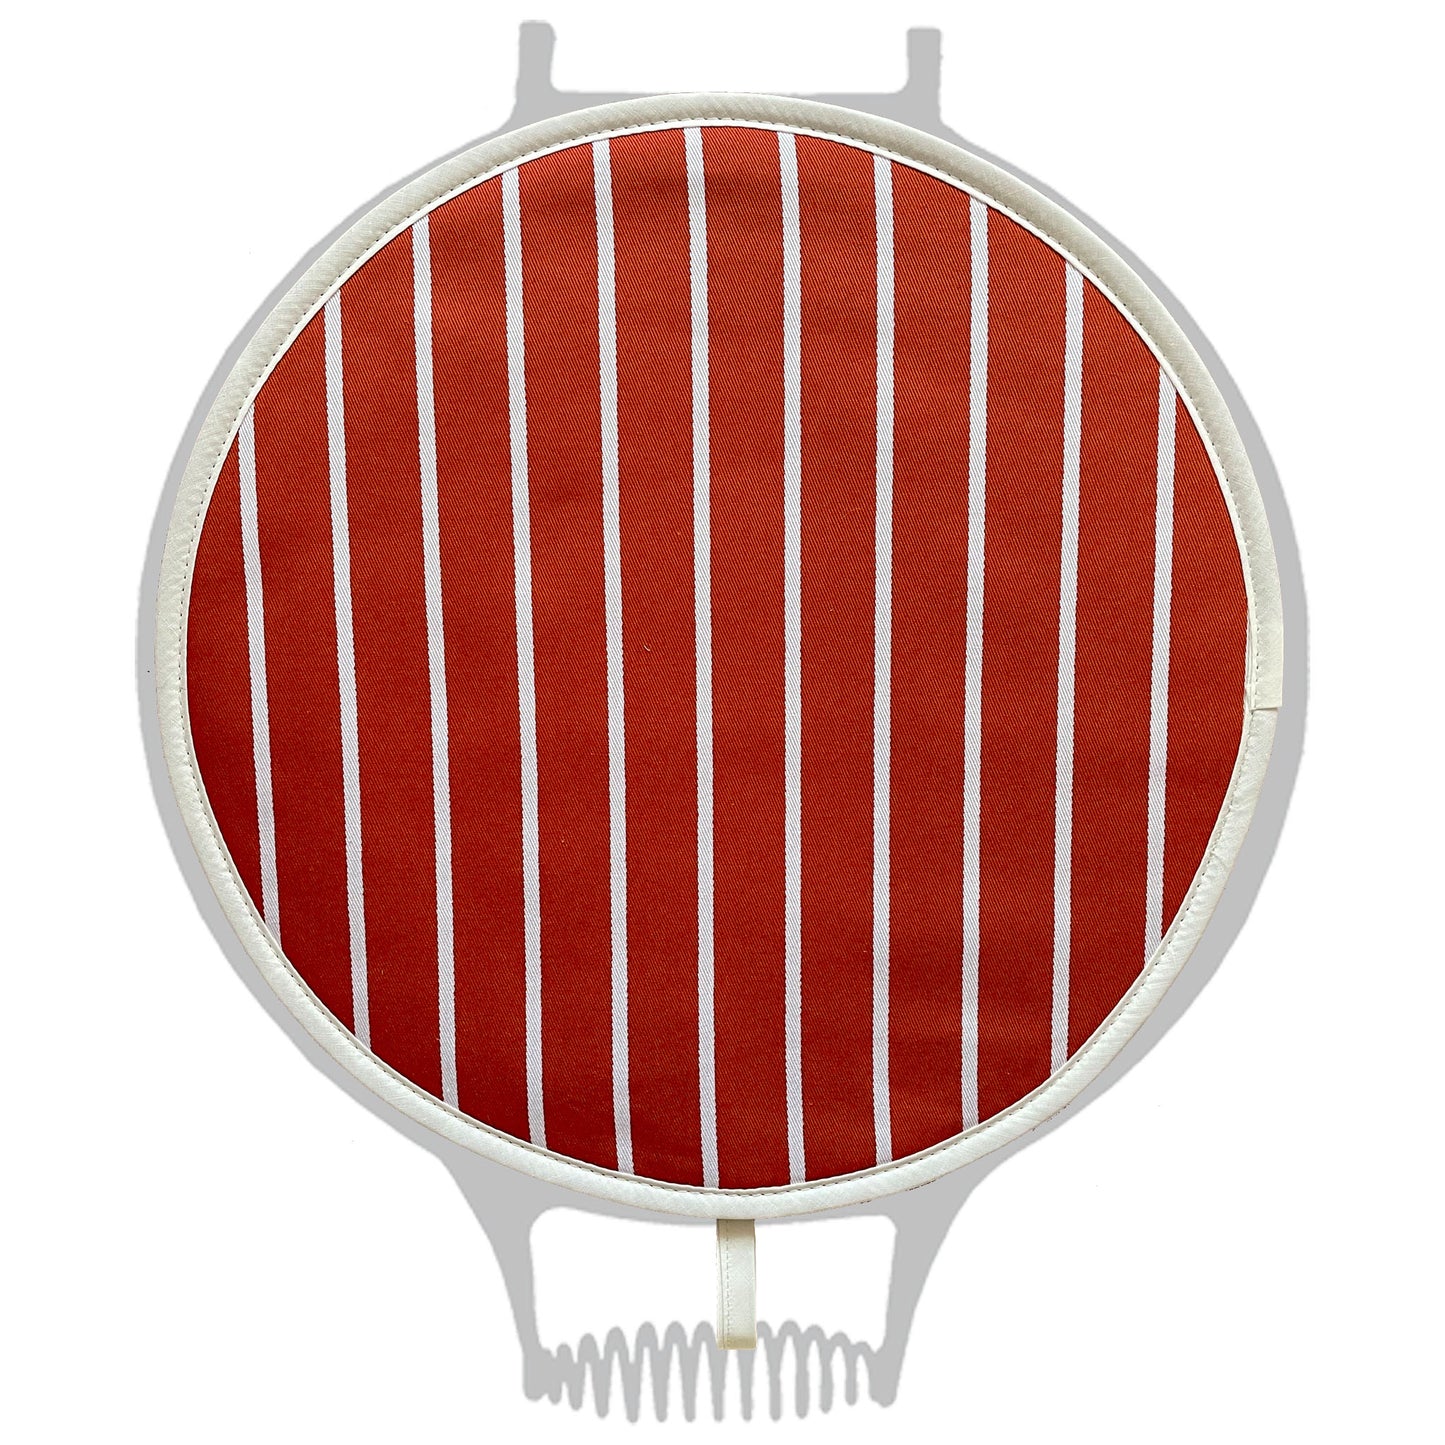 Chef Pad - Aga - The Chef Pad Shop - Terracotta Butchers Stripe Chef Pad For Use With Agas